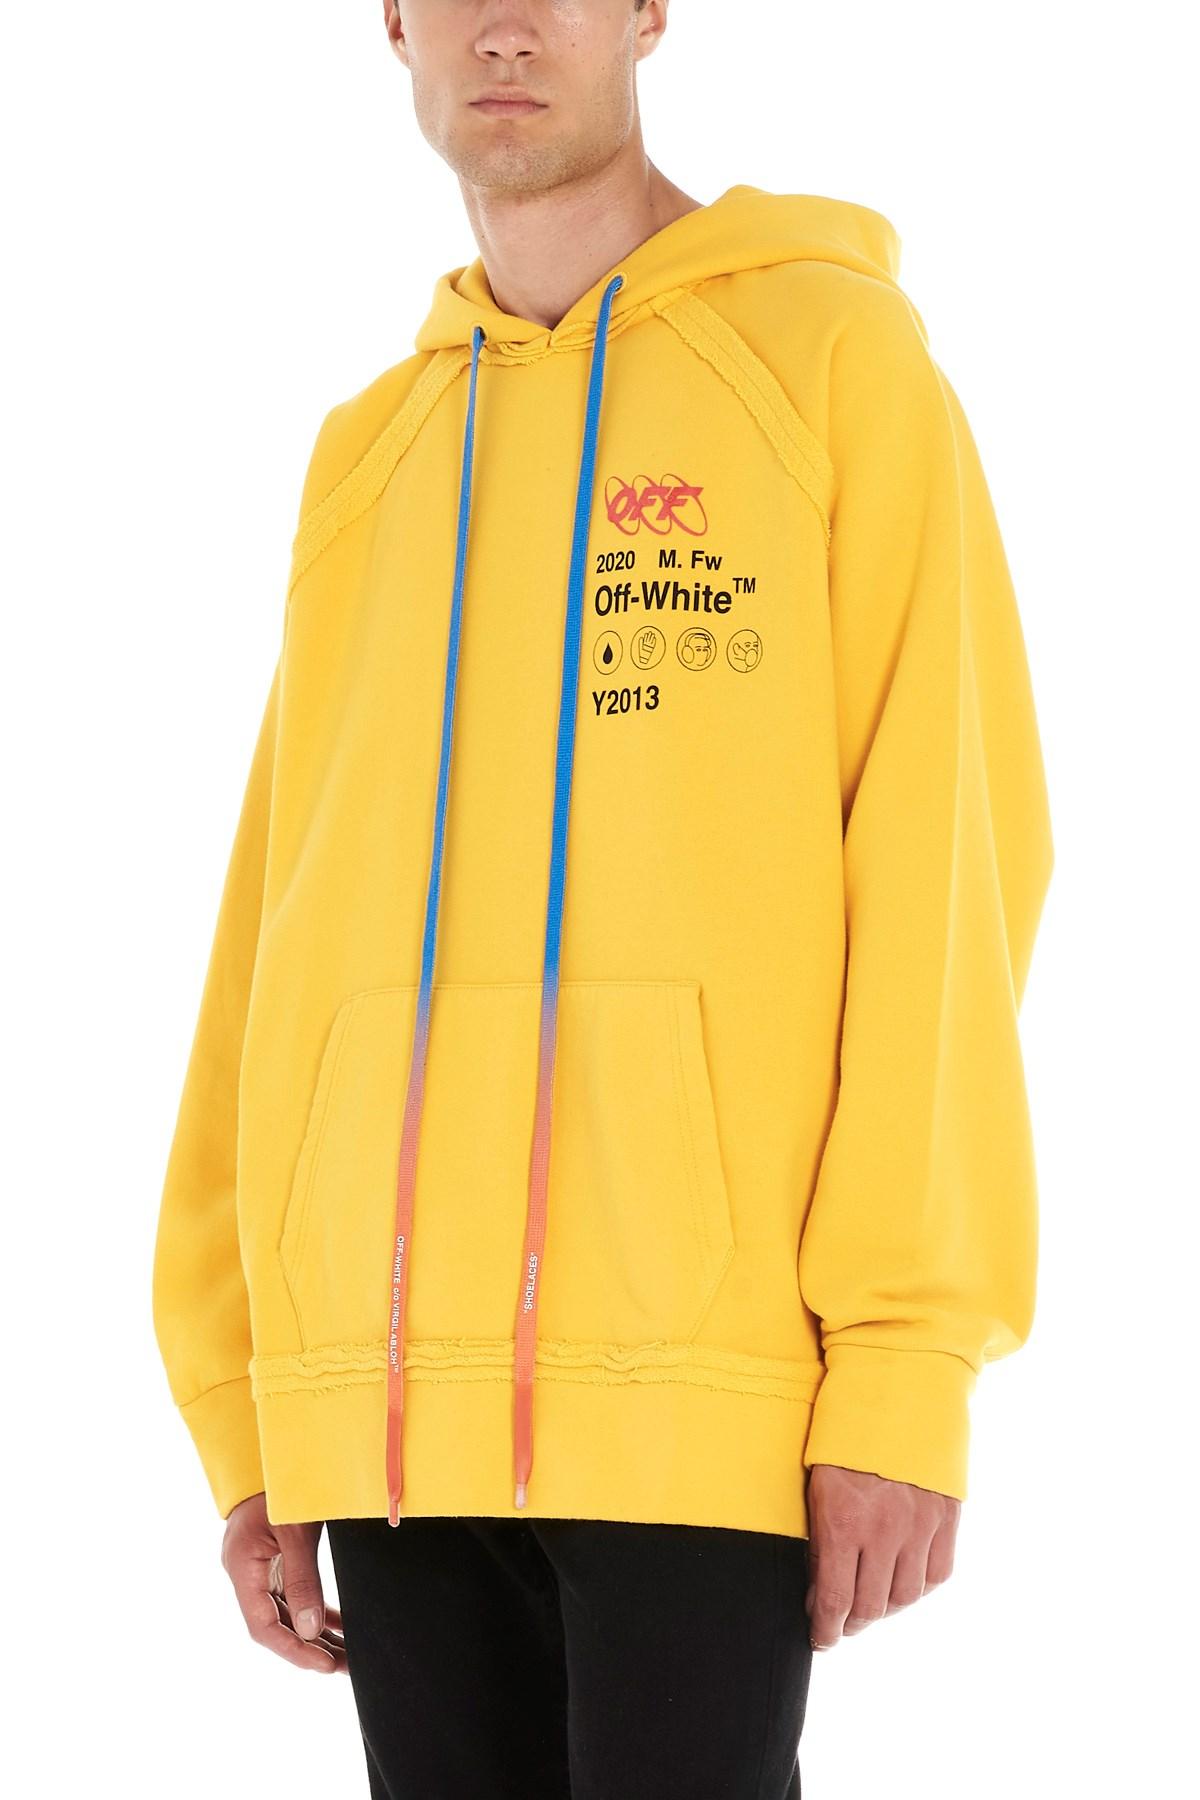 Off-White c/o Virgil Abloh Cotton Yellow Industrial Y2013 Incomplete Hoodie  for Men - Lyst